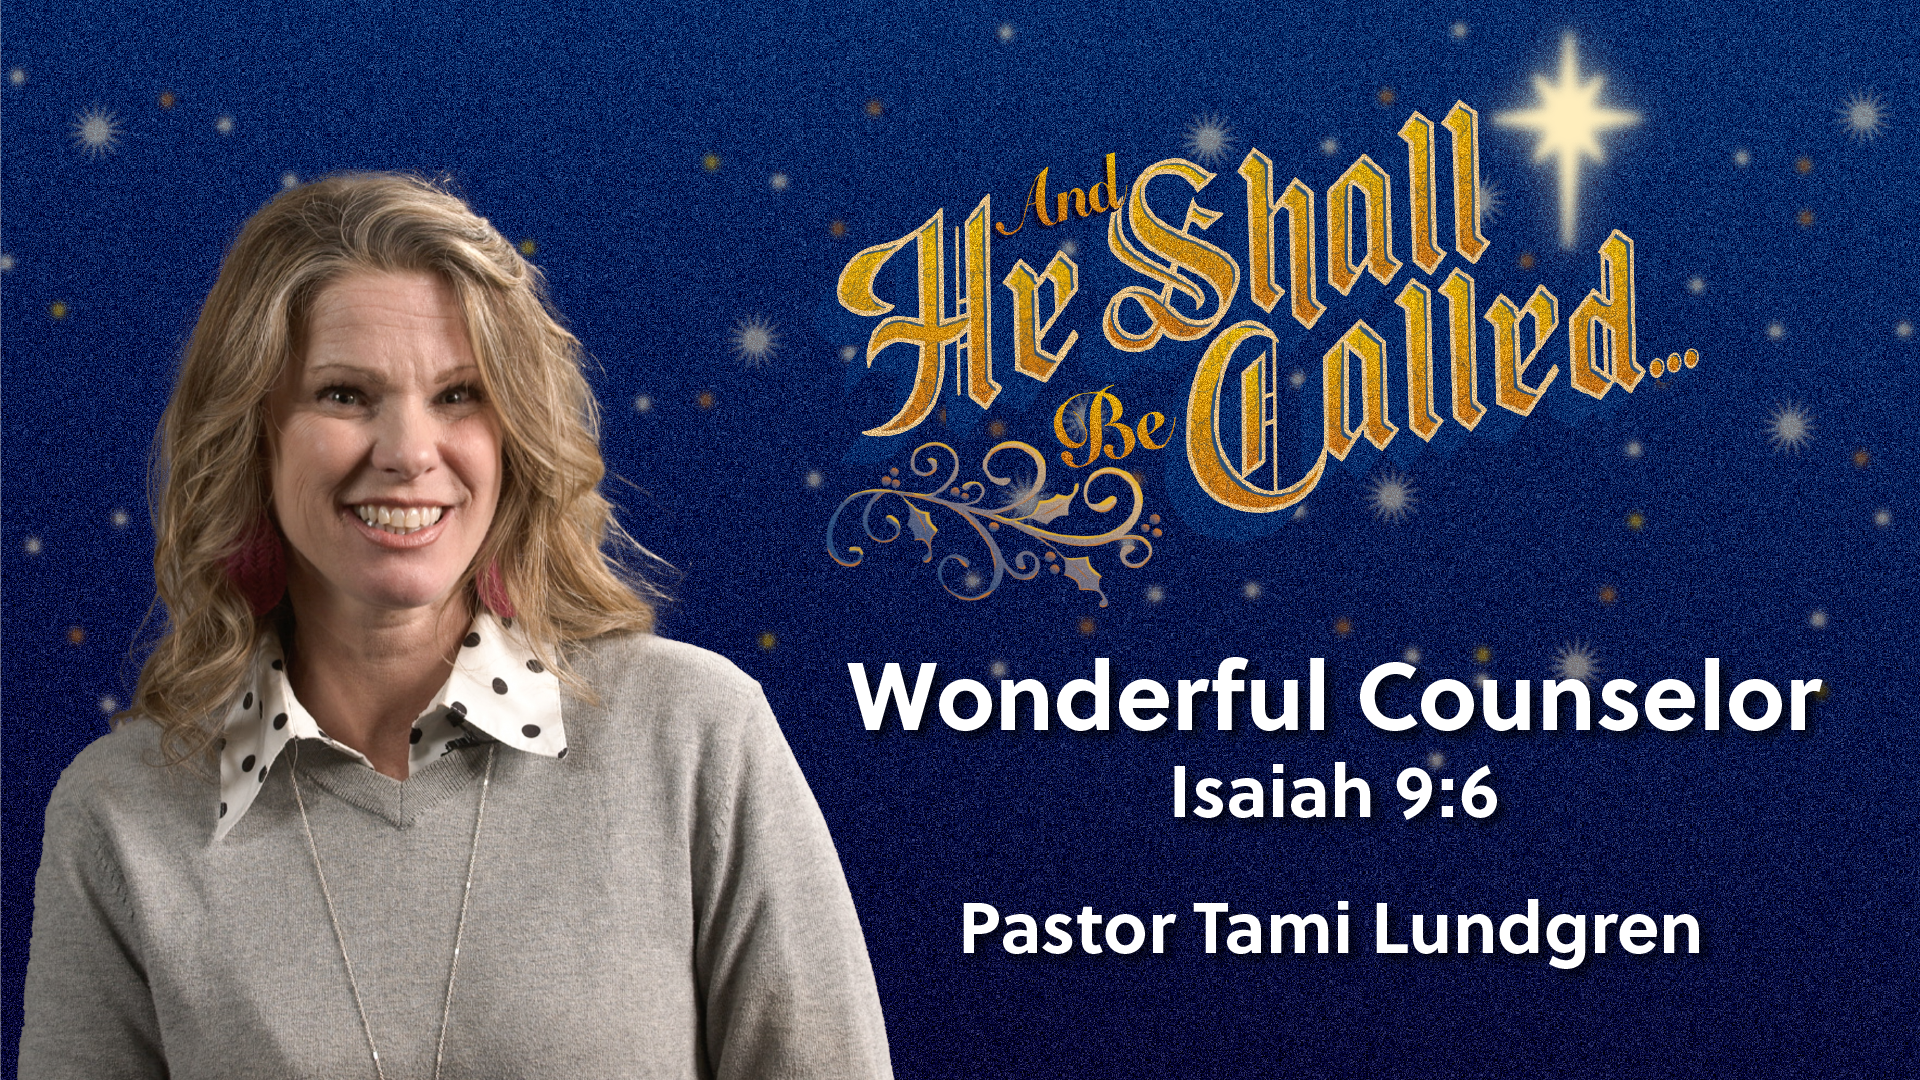 And He Shall Be Called... Wonderful Counselor